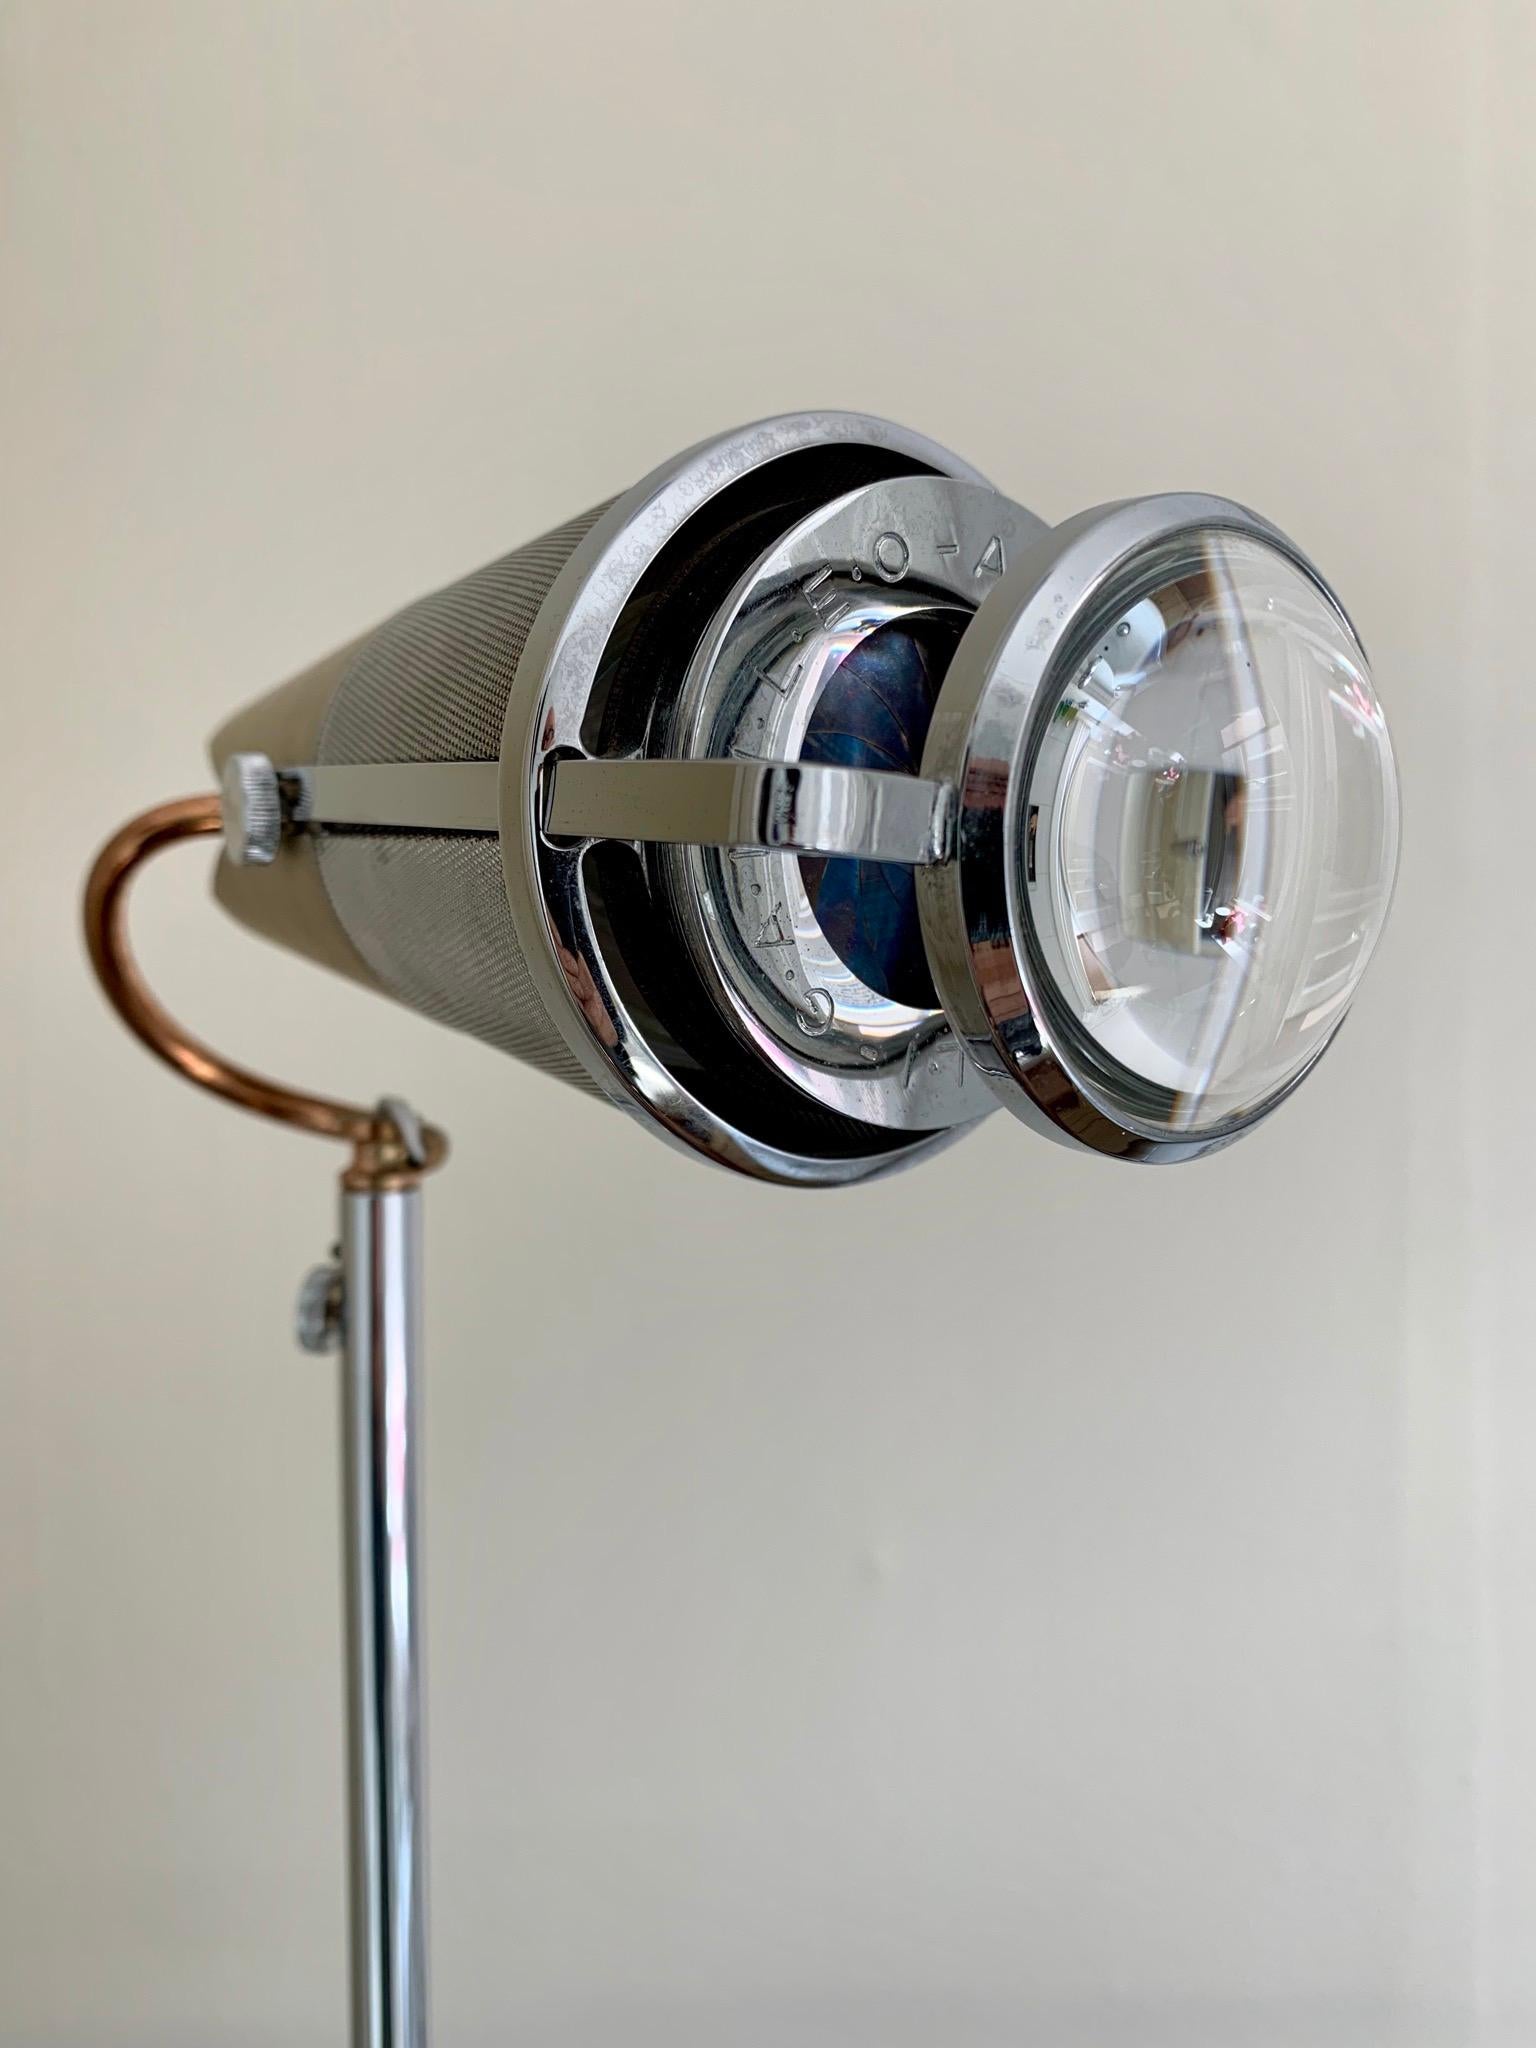 Designed by Arturo Silva for Antonangeli in Milan, circa 1980s. Very unusual lens design complete with zoom able magnifying lens and built in diaphragm. This mechanism allows the light to be dimmable.
The bulb is halogen but can be changed for an